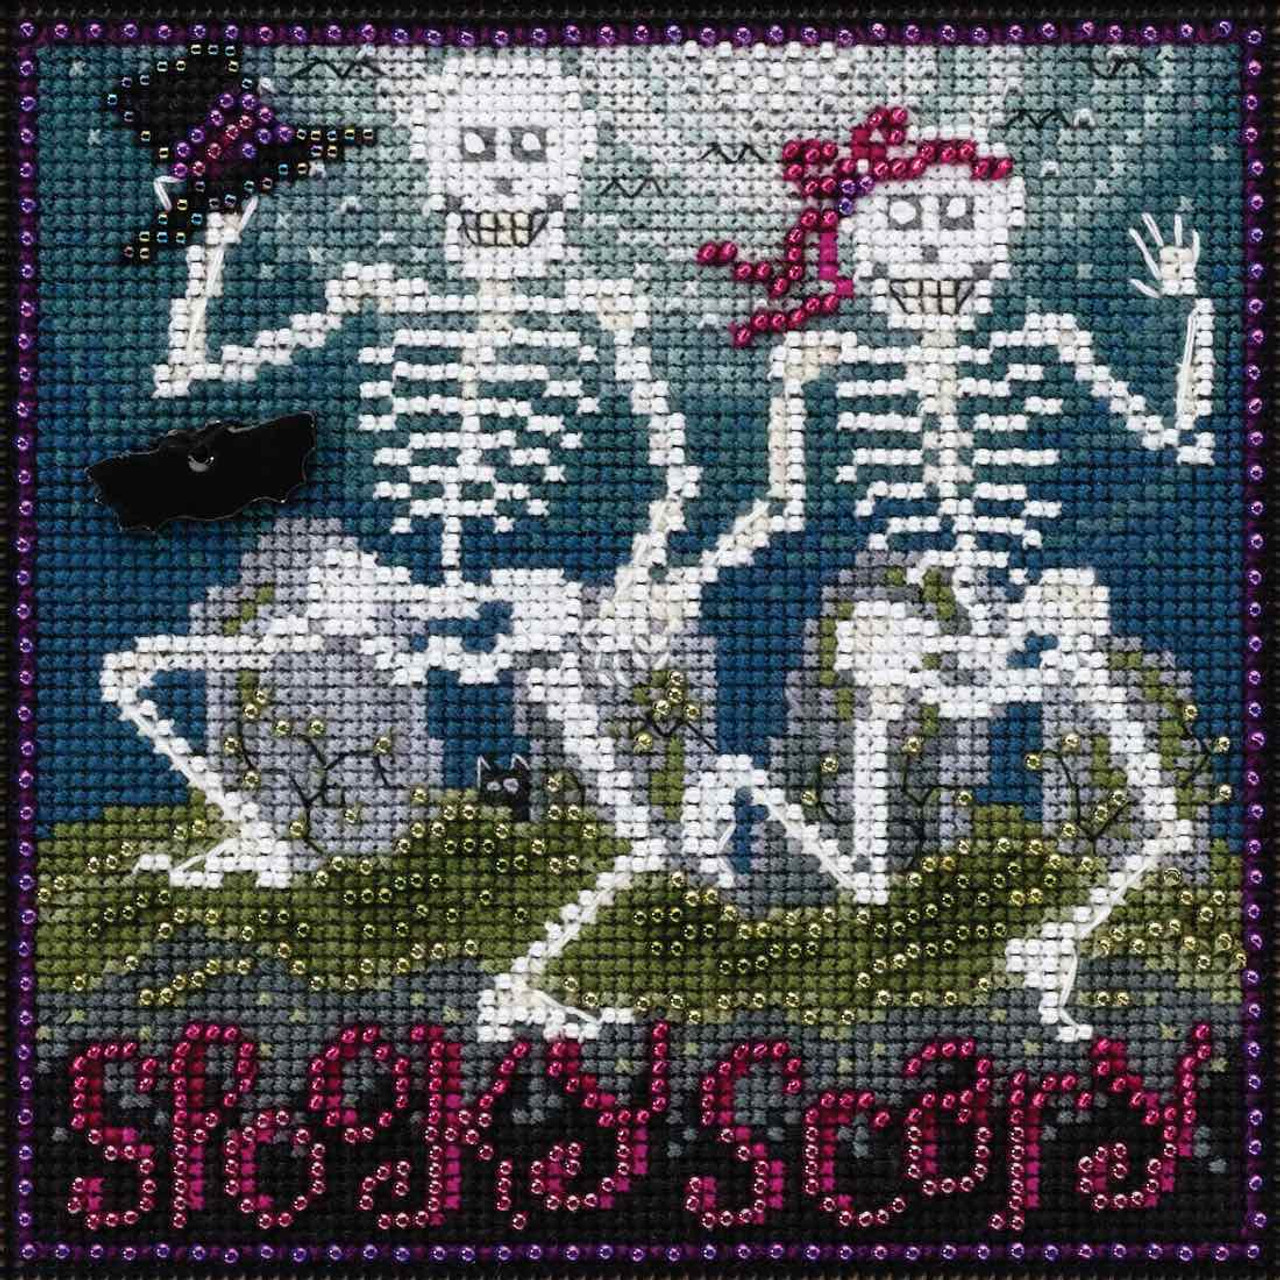 Stitched area of Spooky Scary Cross Stitch Kit Mill Hill 2017 Buttons & Beads Autumn MH141723